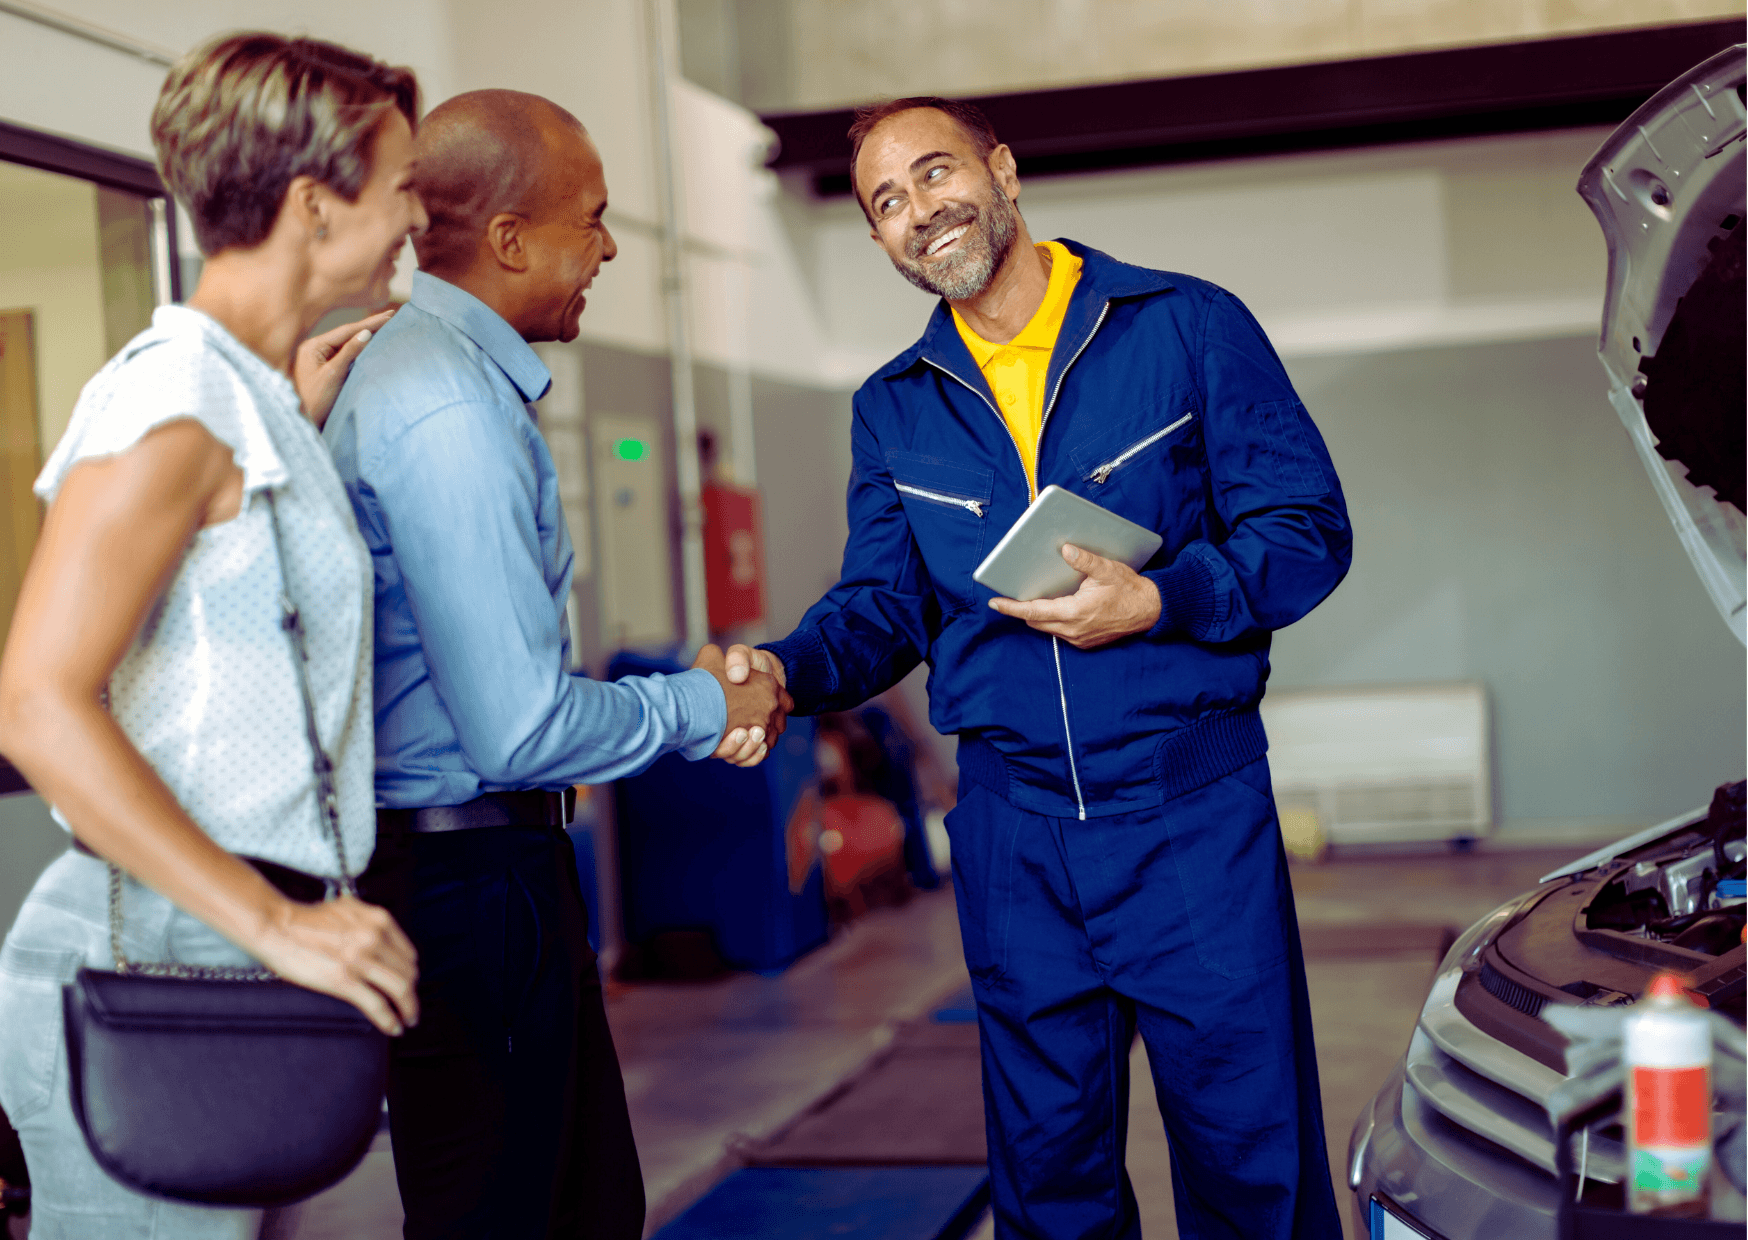 Factors that Customers Consider When Going to an Auto Repair Shop